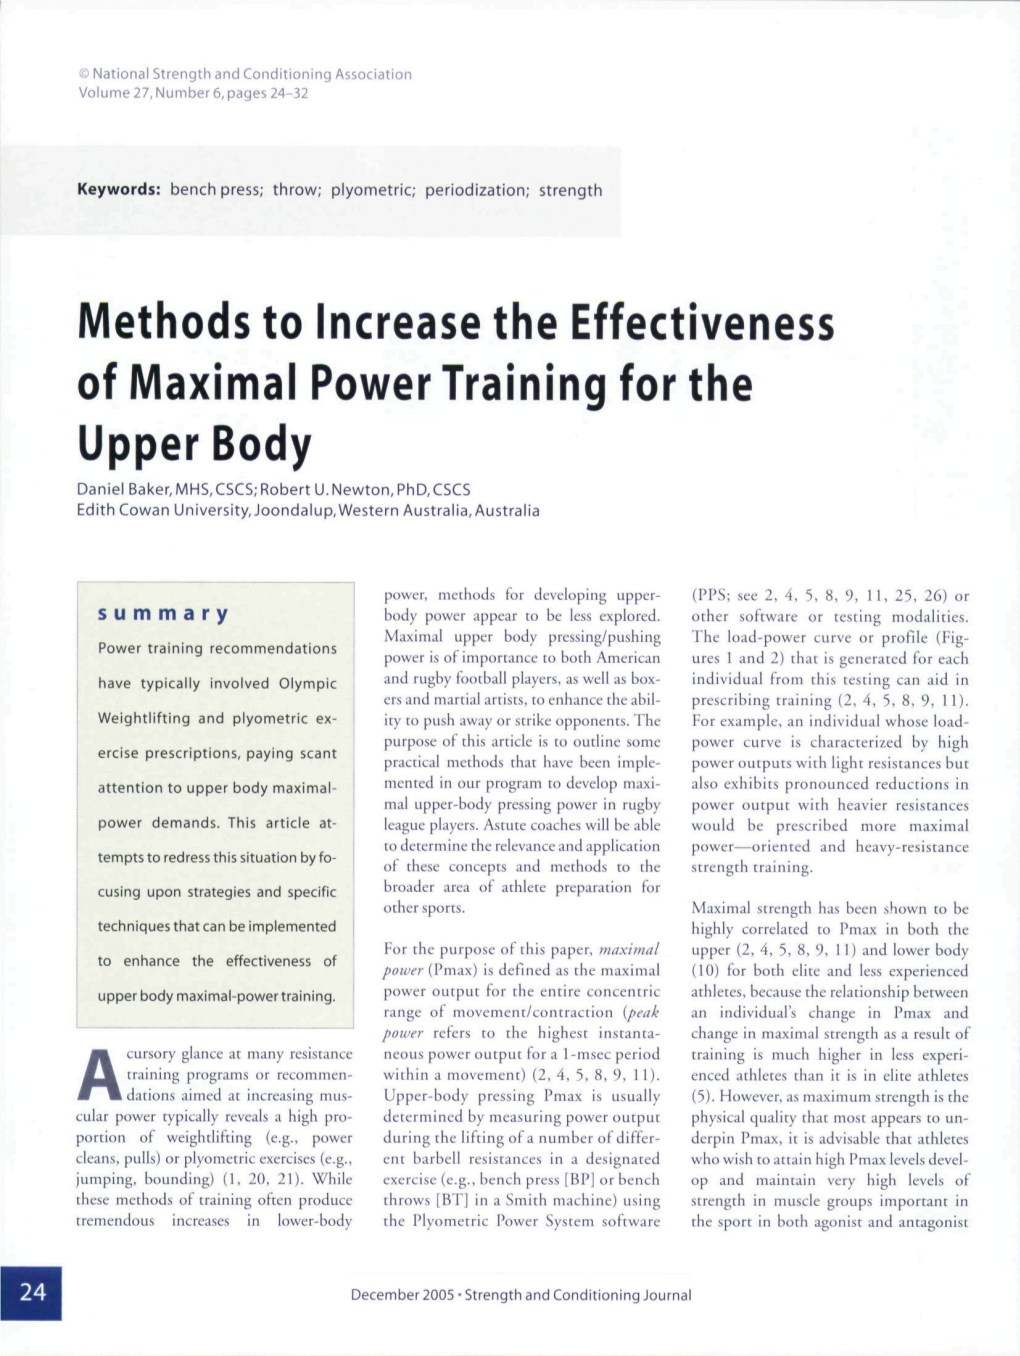 Methods to Increase the Effectiveness of Maximal Power Training for The